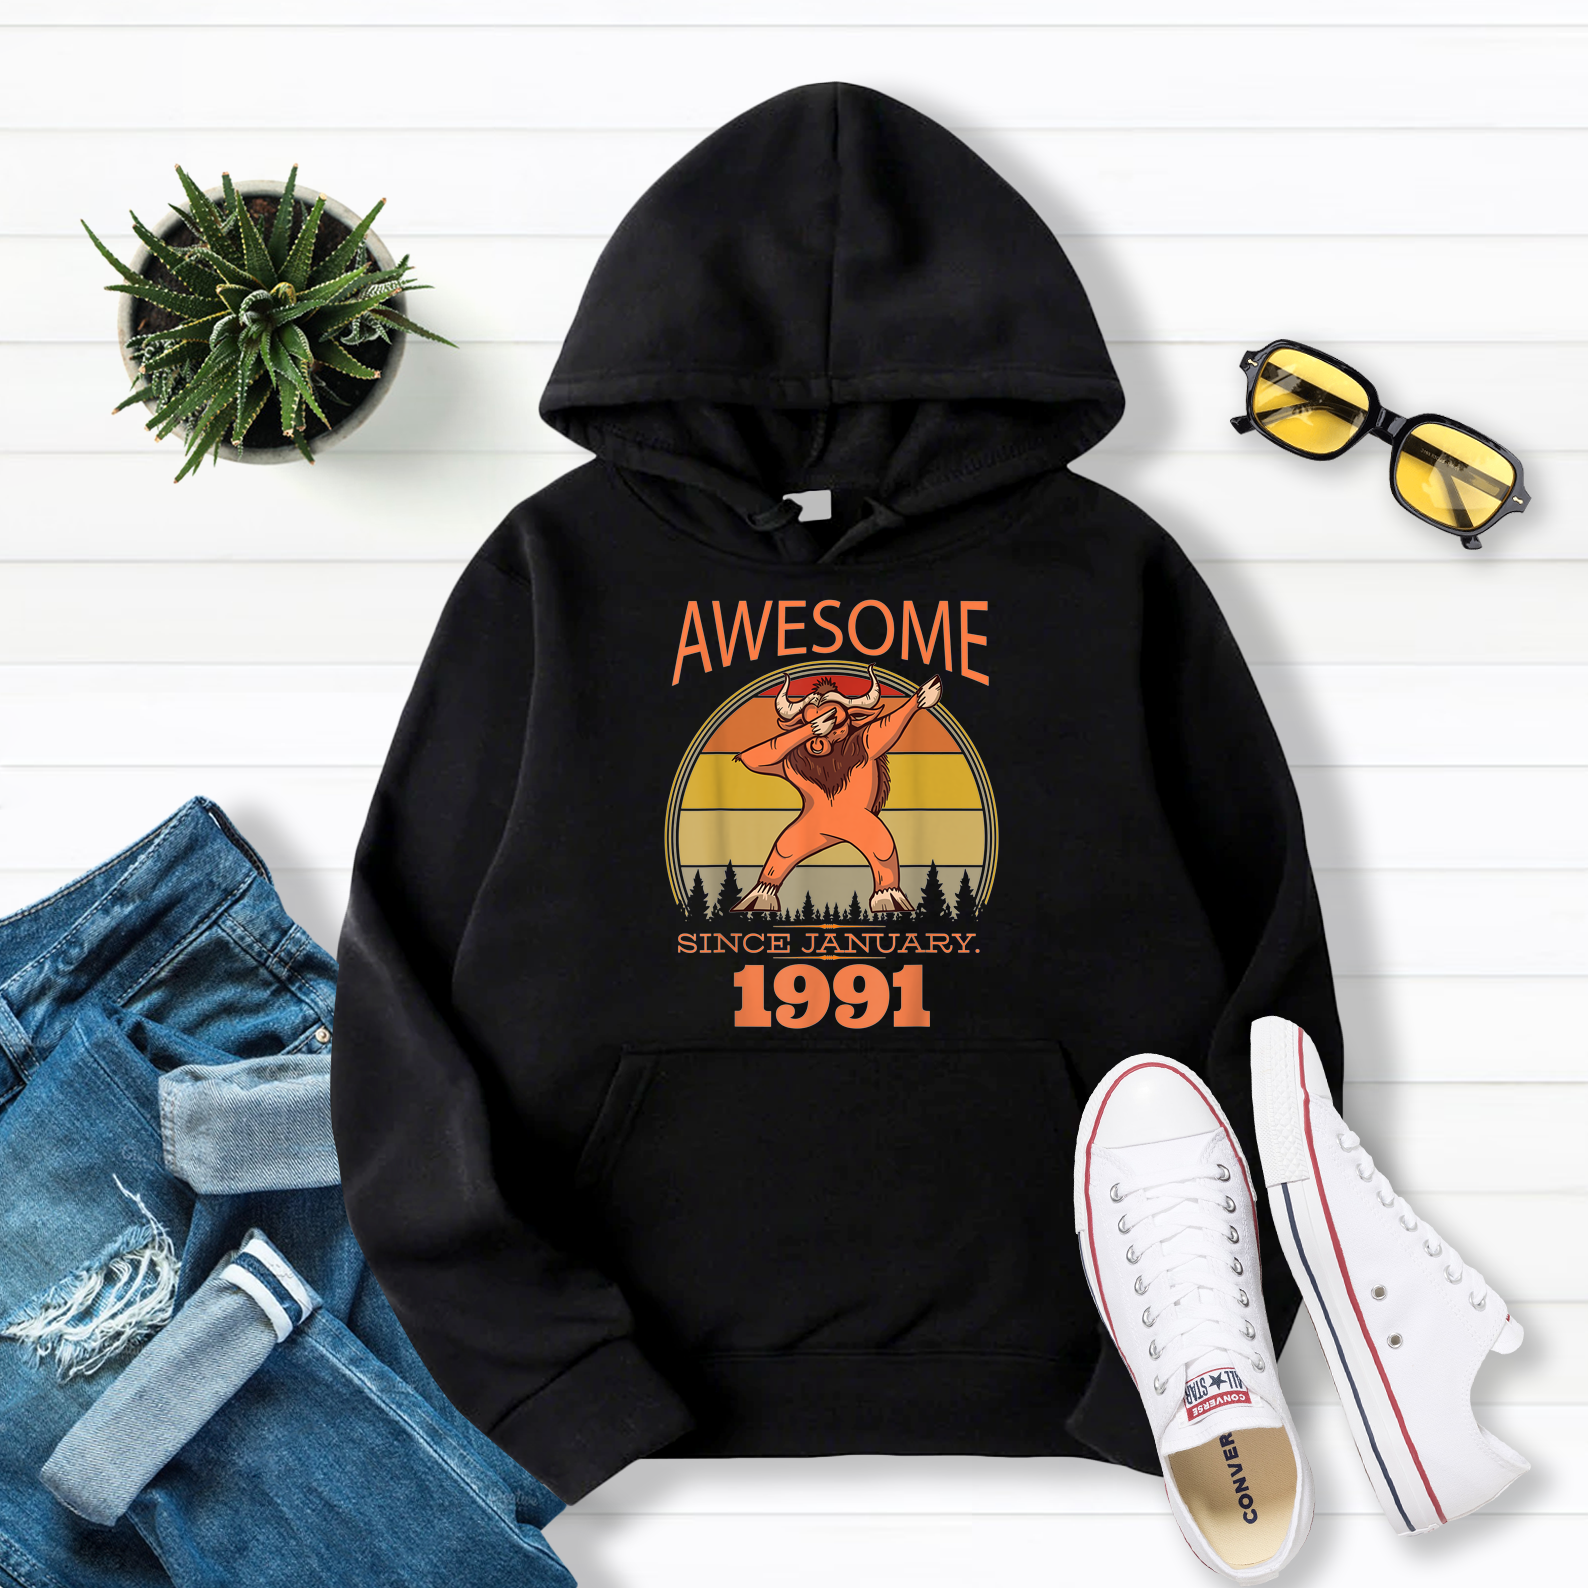 30 Years Old Birthday Awesome Since January 1991 Ox Dabbing Pullover Hoodie Black S-5XL